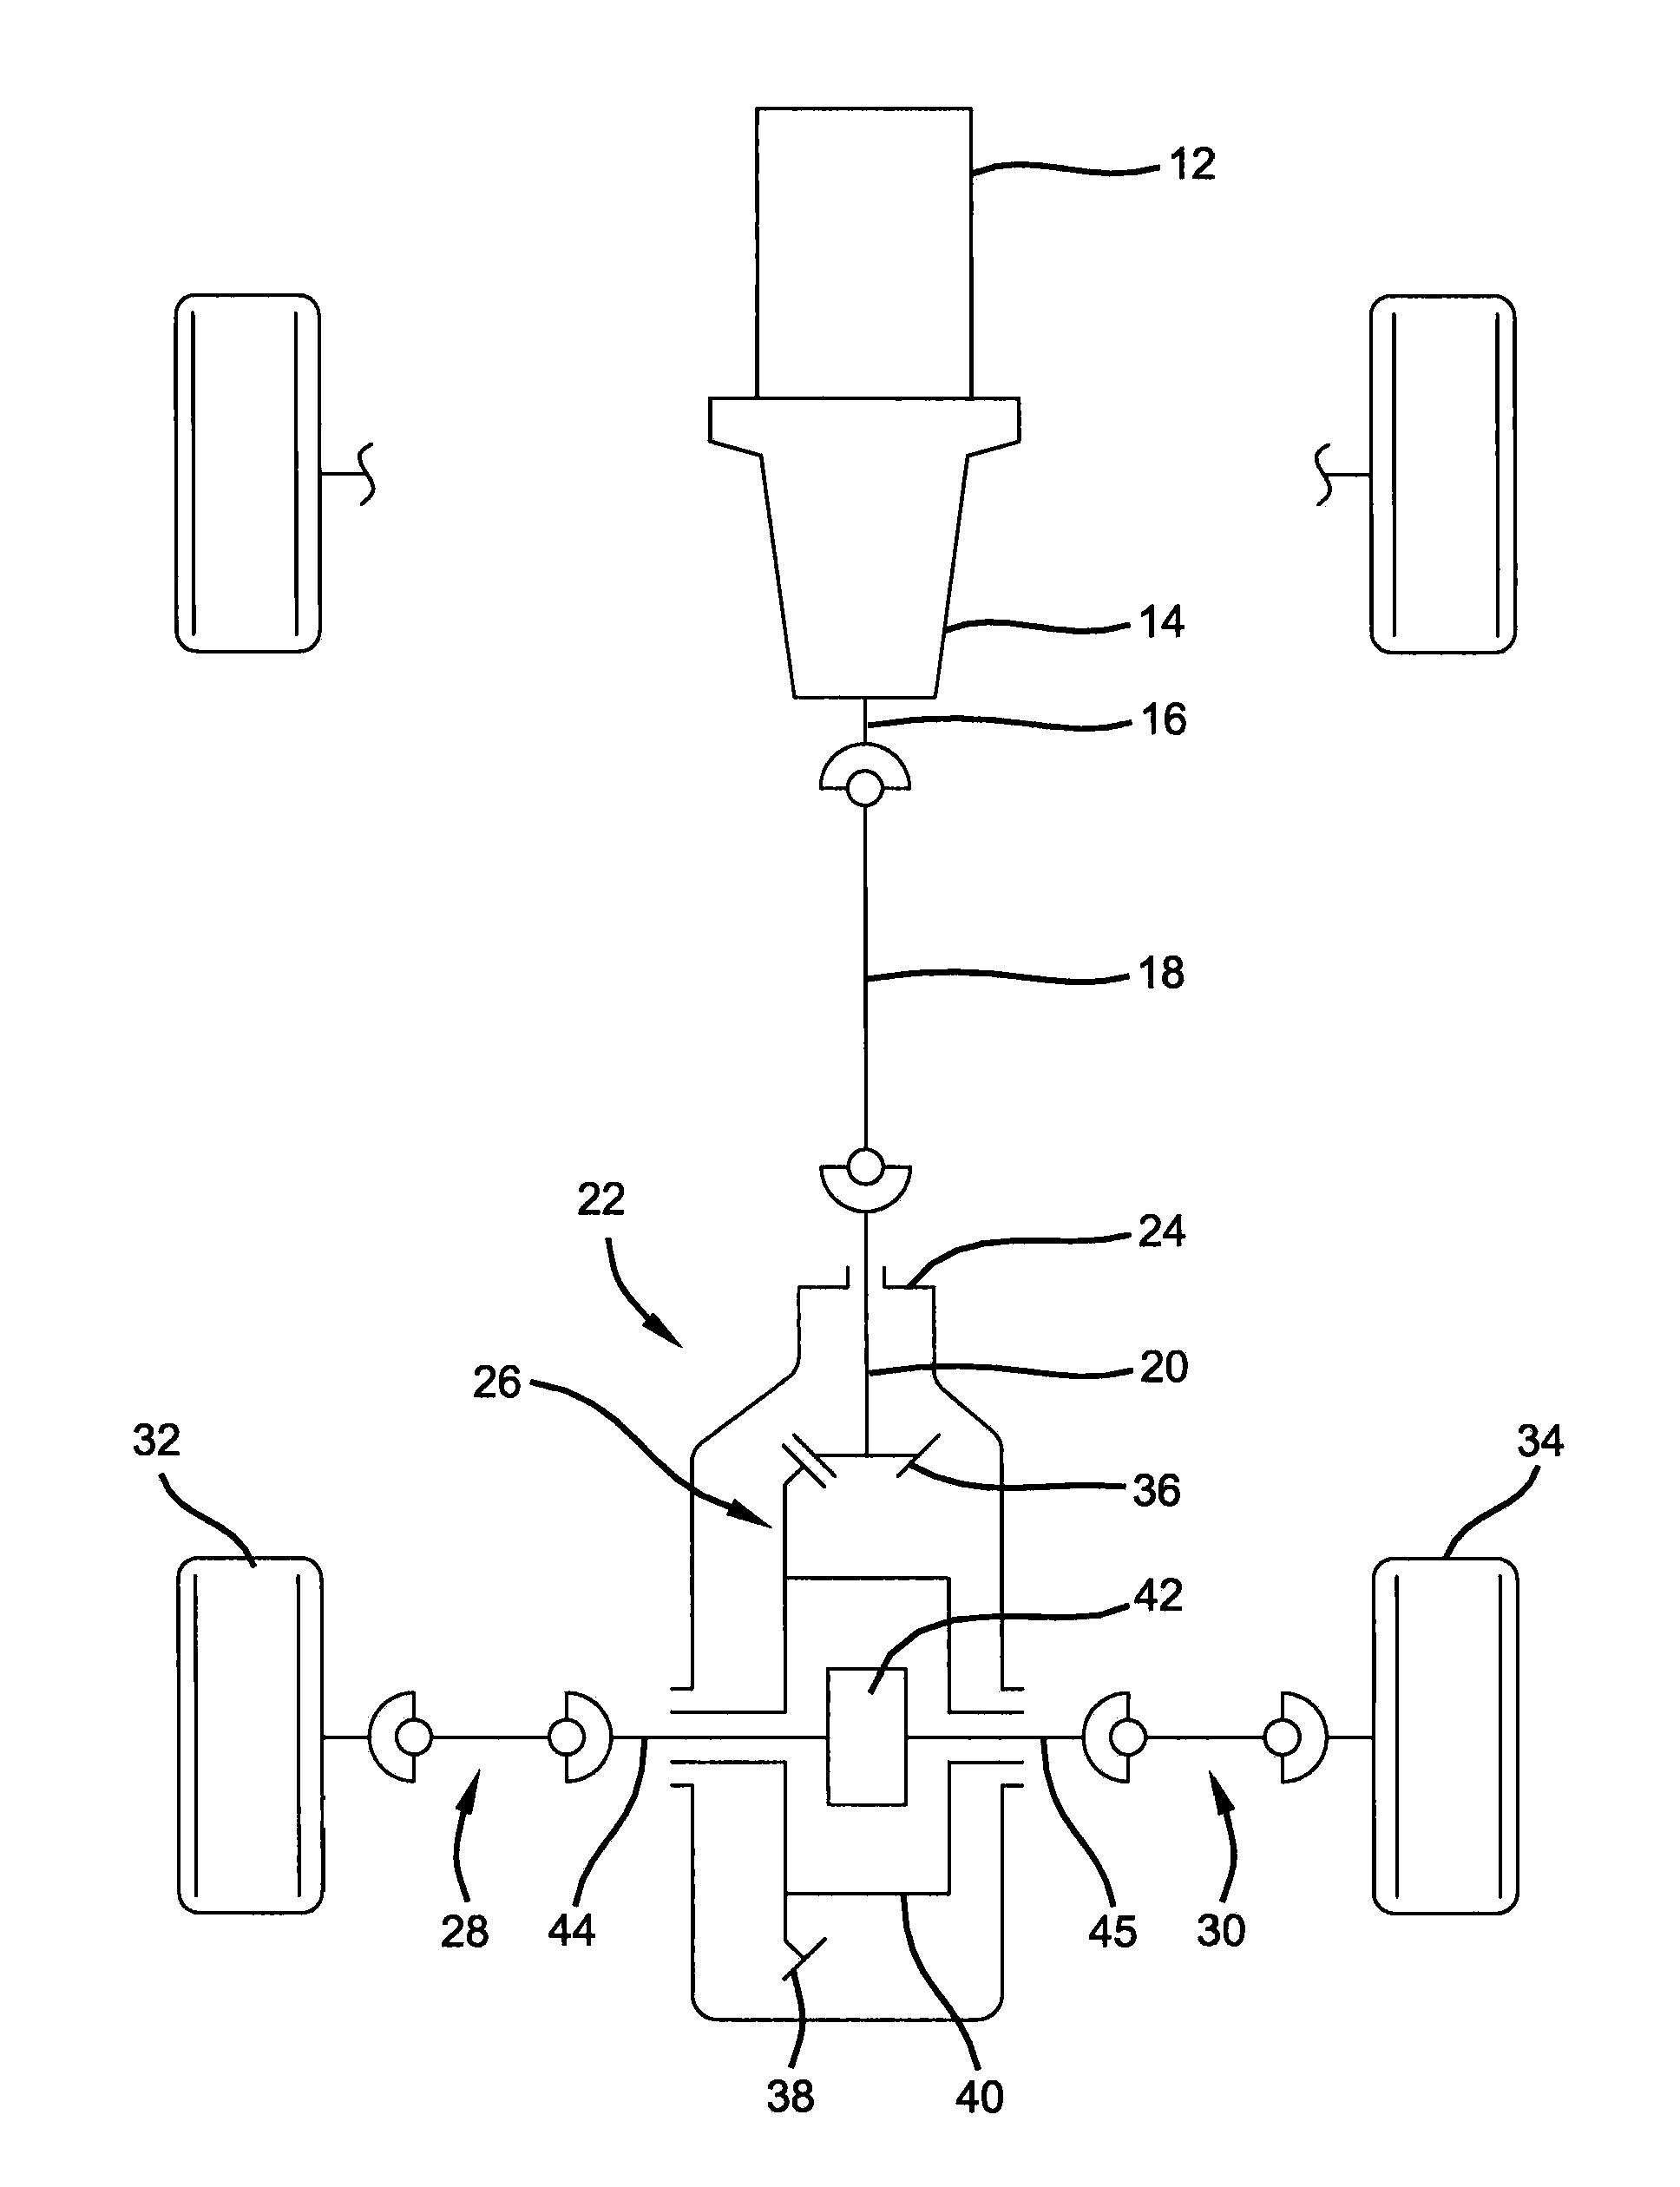 Spacer pin arrangement for helical gear differential